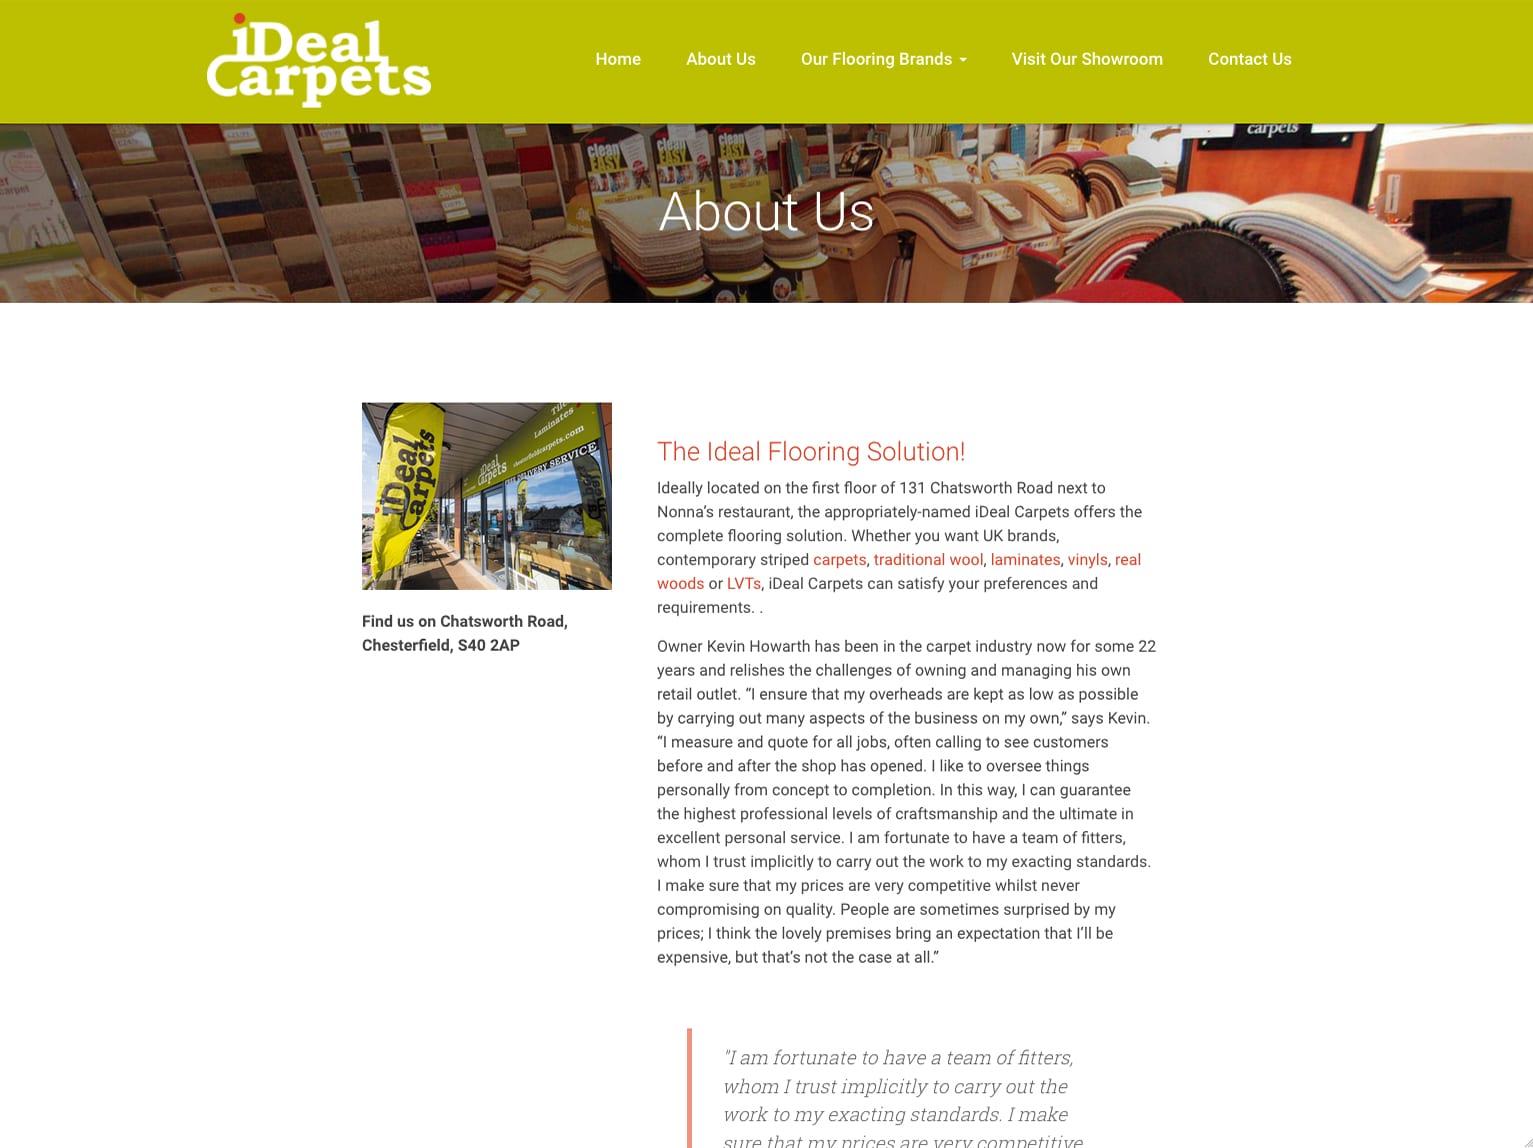 iDeal Carpets Website by Nettl of Chesterfield